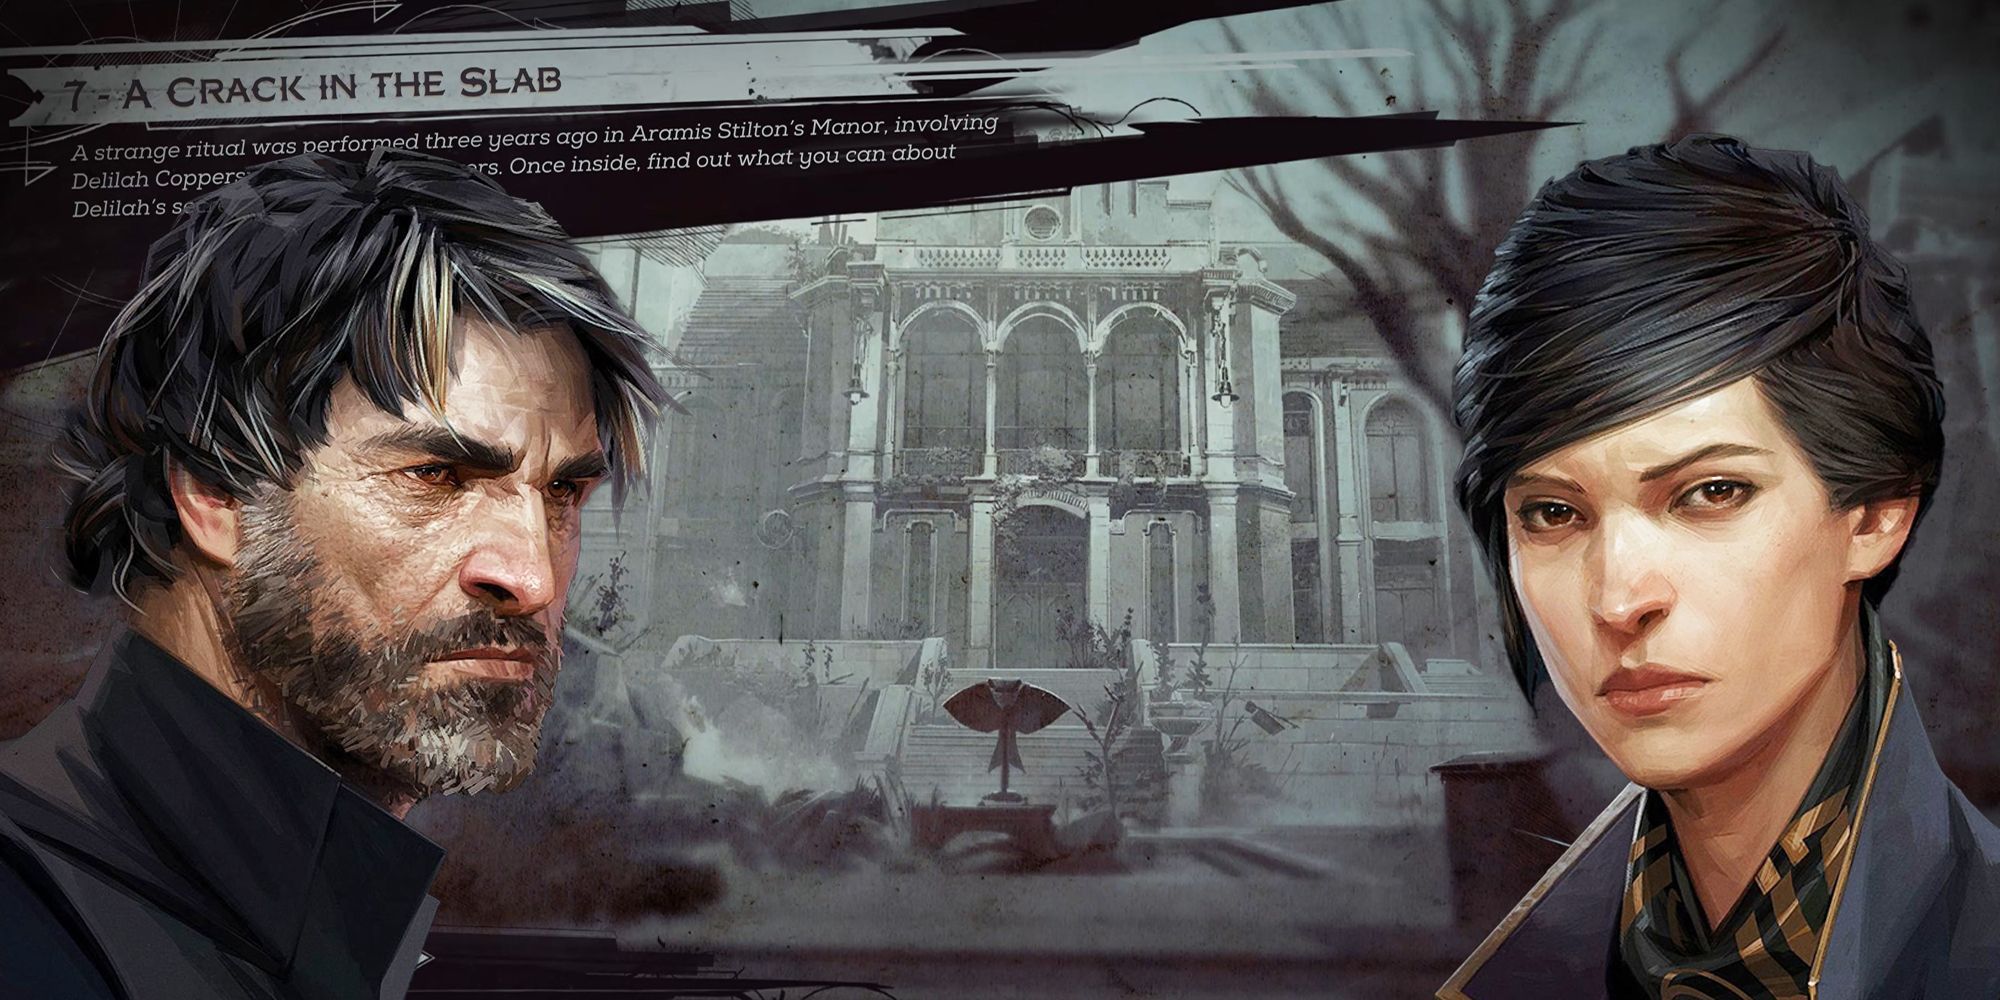 dishonored-2-crack-in-the-slab-walkthrough-lalapabitcoin